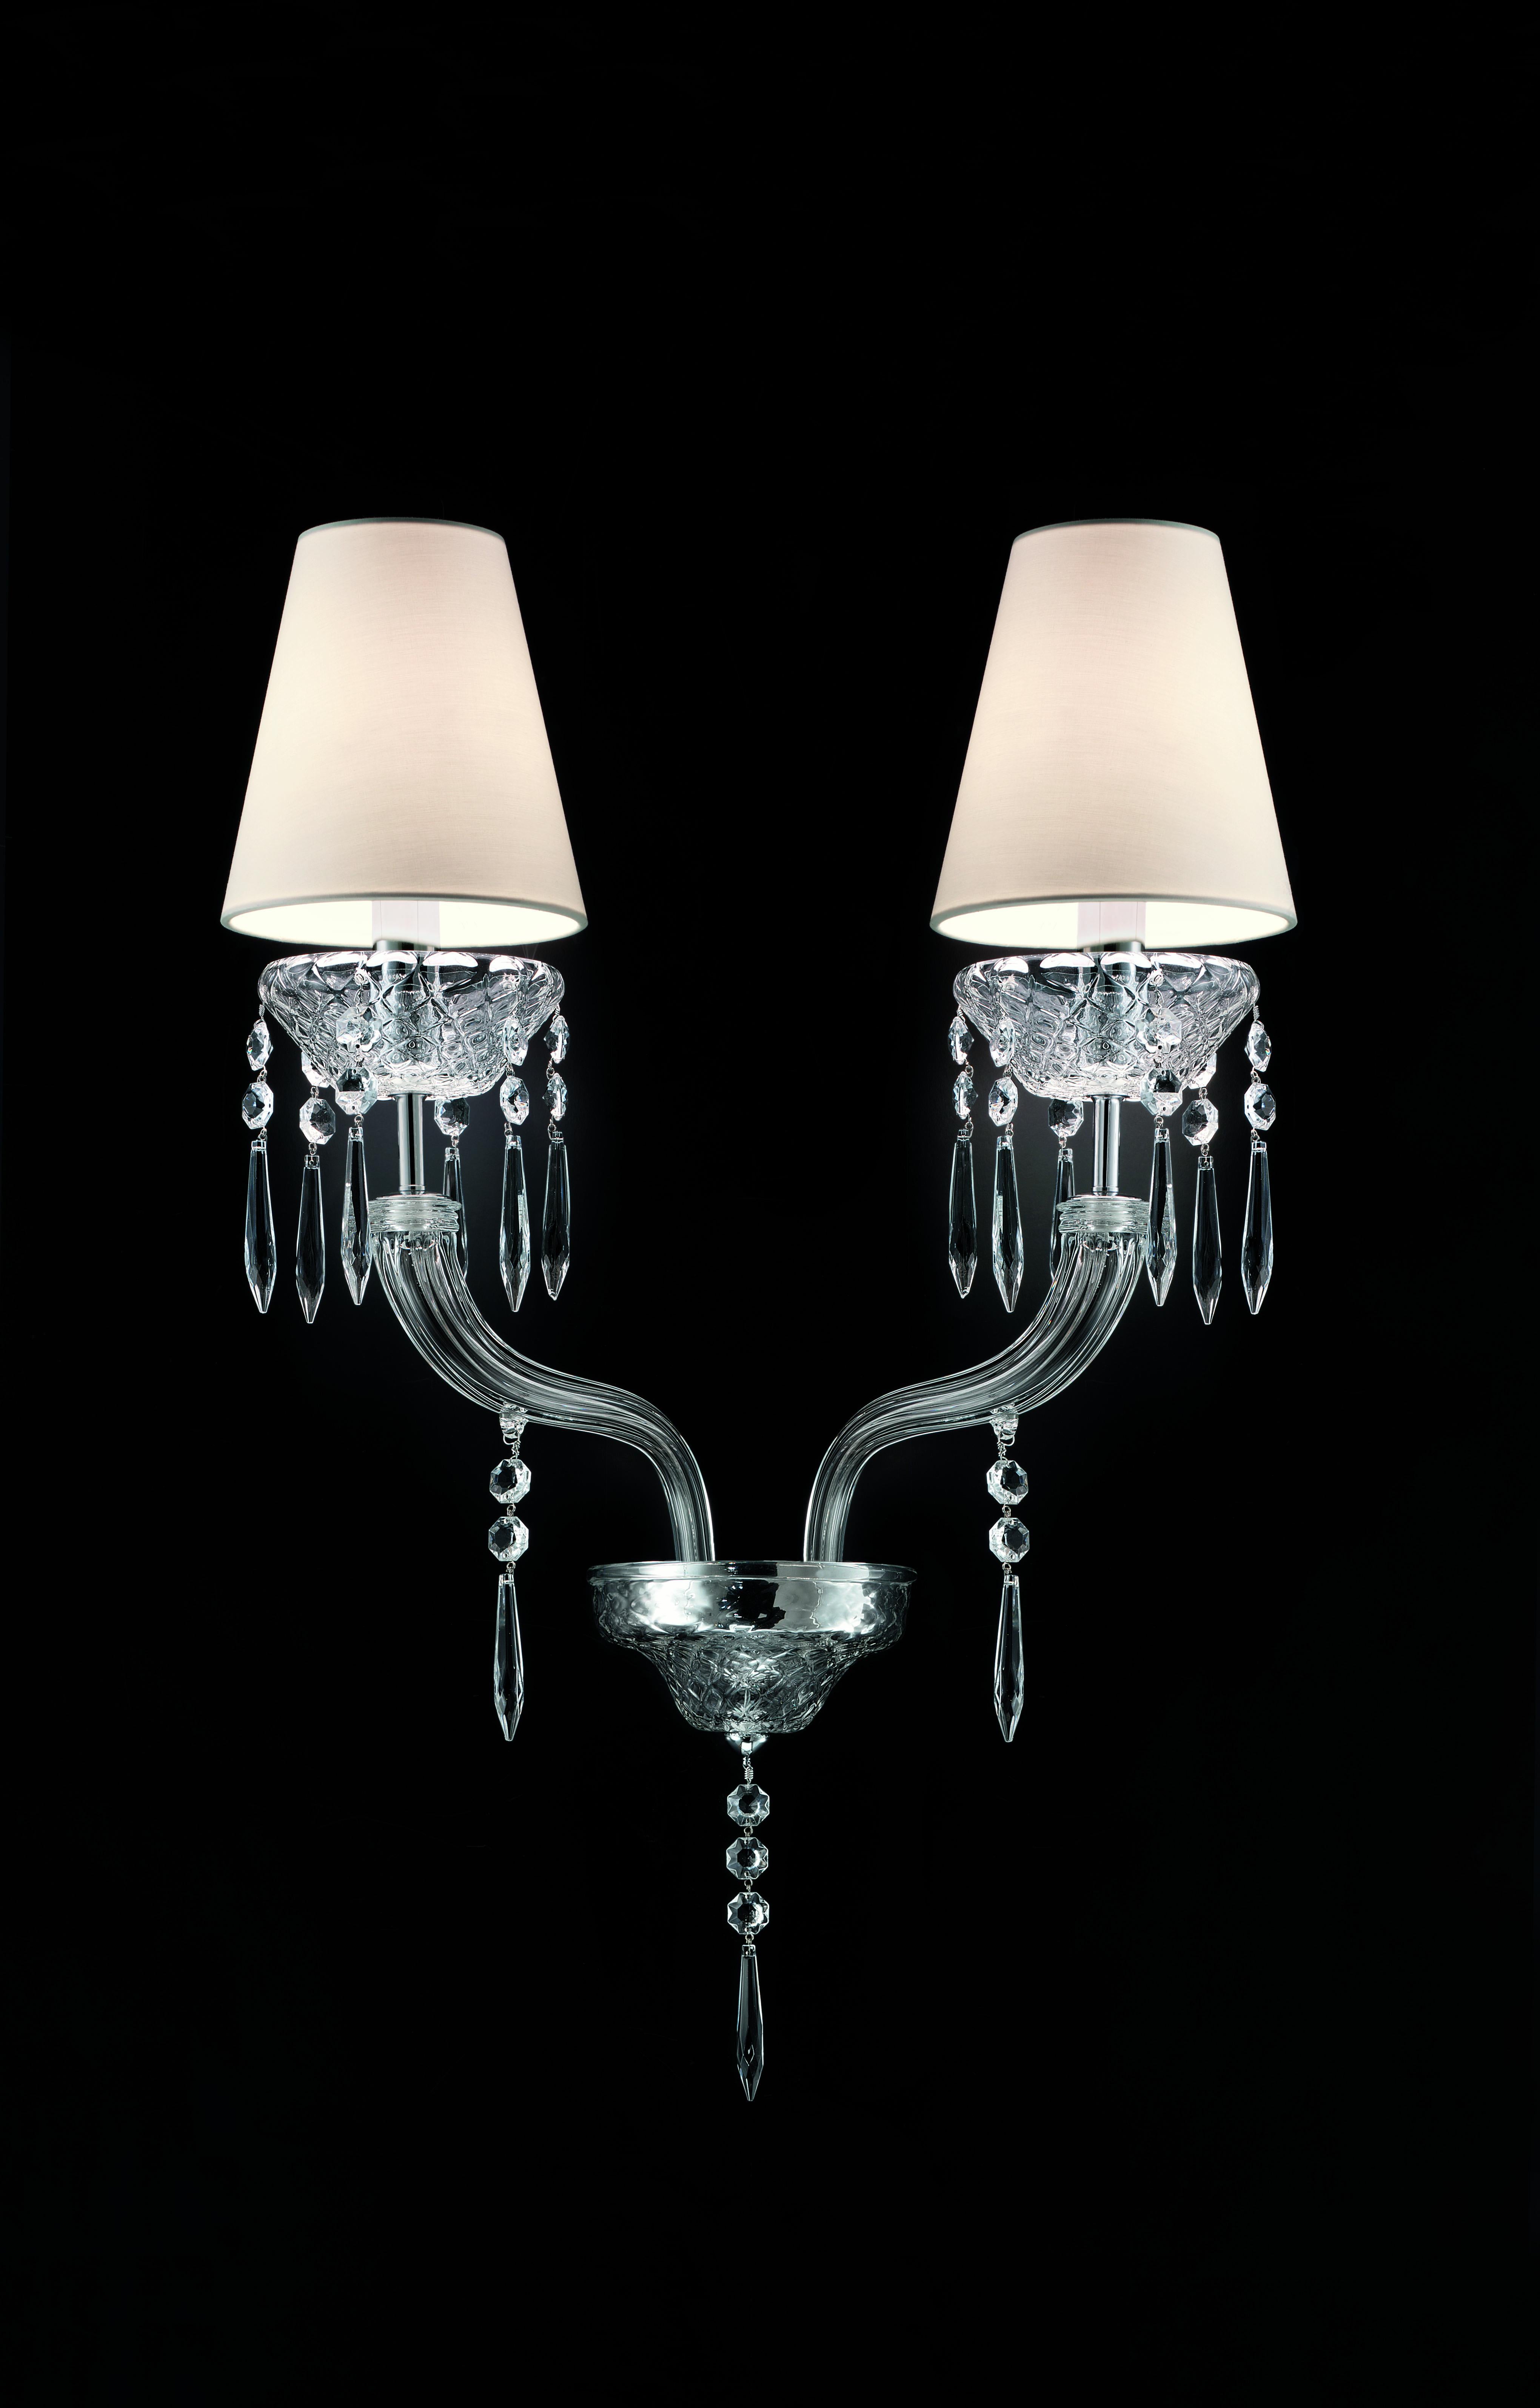 Clear (Crystal_CC) President 5695 02 Wall Scone in Glass with White Shade, by Barovier&Toso 2